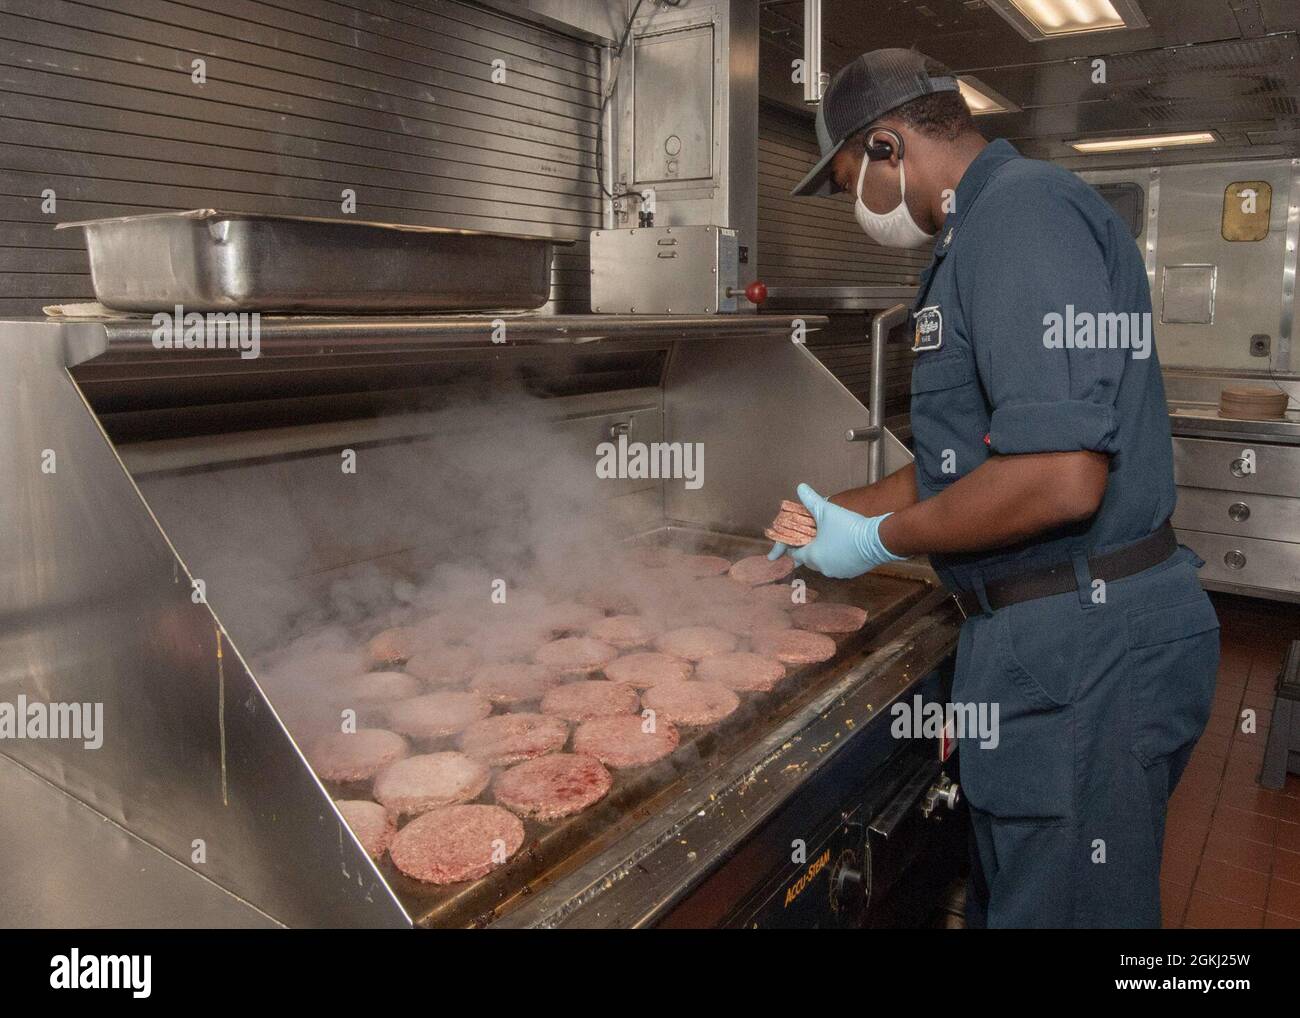 PACIFIC OCEAN (April 28, 2021) U.S. Navy Culinary Specialist 3rd Class Tilman Ware, from Abilene, Texas, cooks hamburgers in the galley of the Ticonderoga-class guided-missile cruiser USS Bunker Hill (CG 52) April 28, 2021. Bunker Hill, part of the Theodore Roosevelt Carrier Strike Group, is on a scheduled deployment conducting routine operations in U.S. 3rd Fleet. Stock Photo